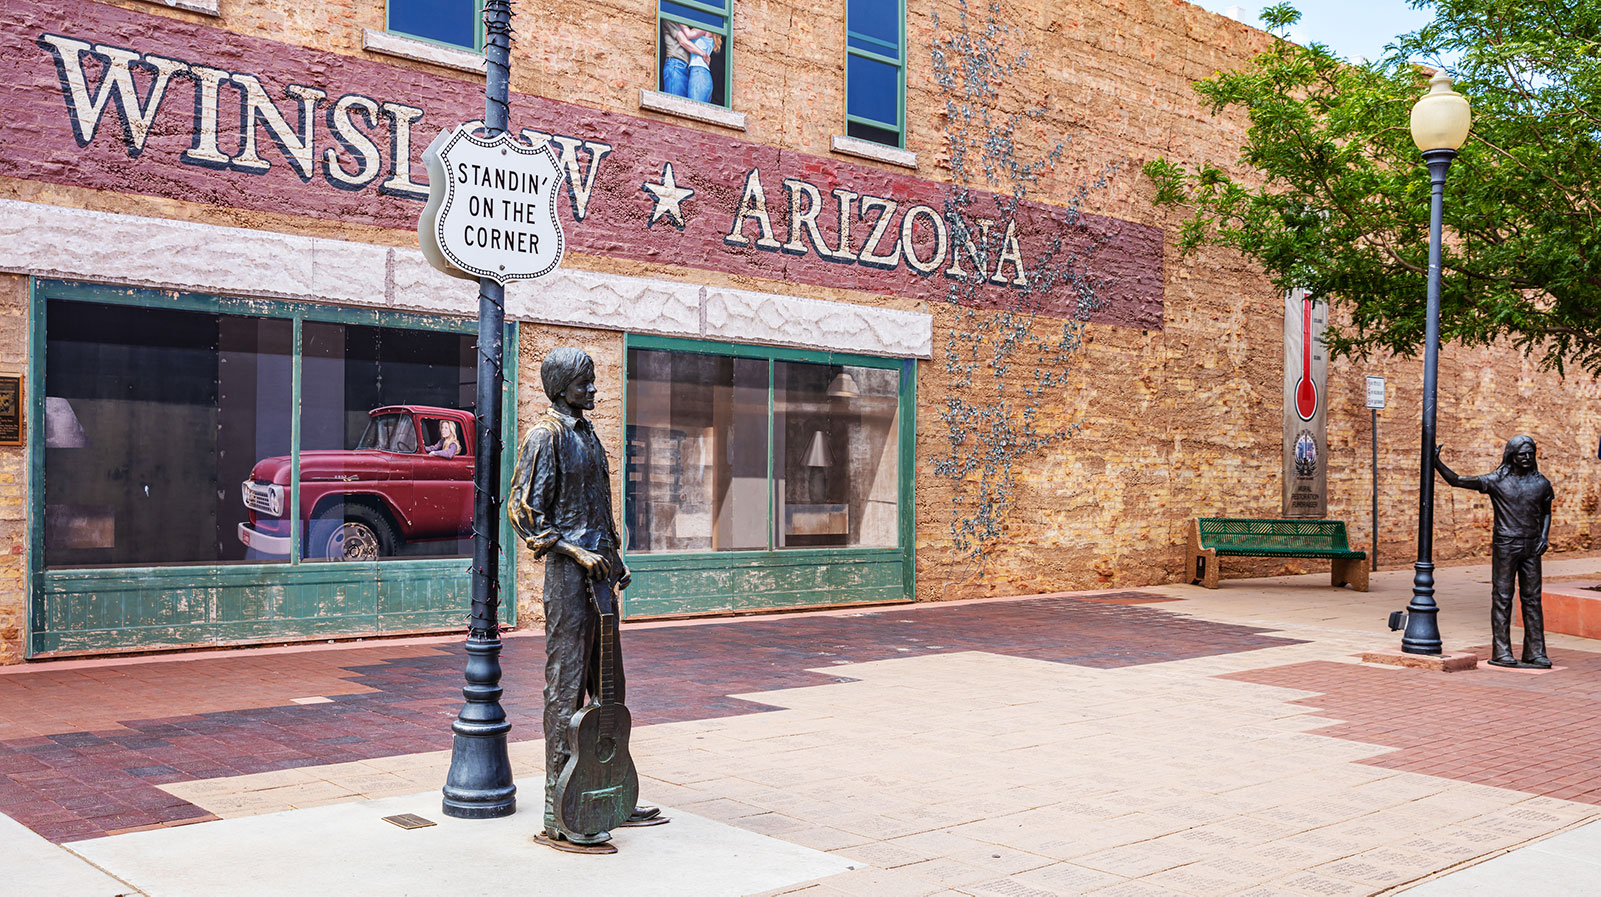 Statue and mural at the corner of Winslow as made famous in the Route 66 song